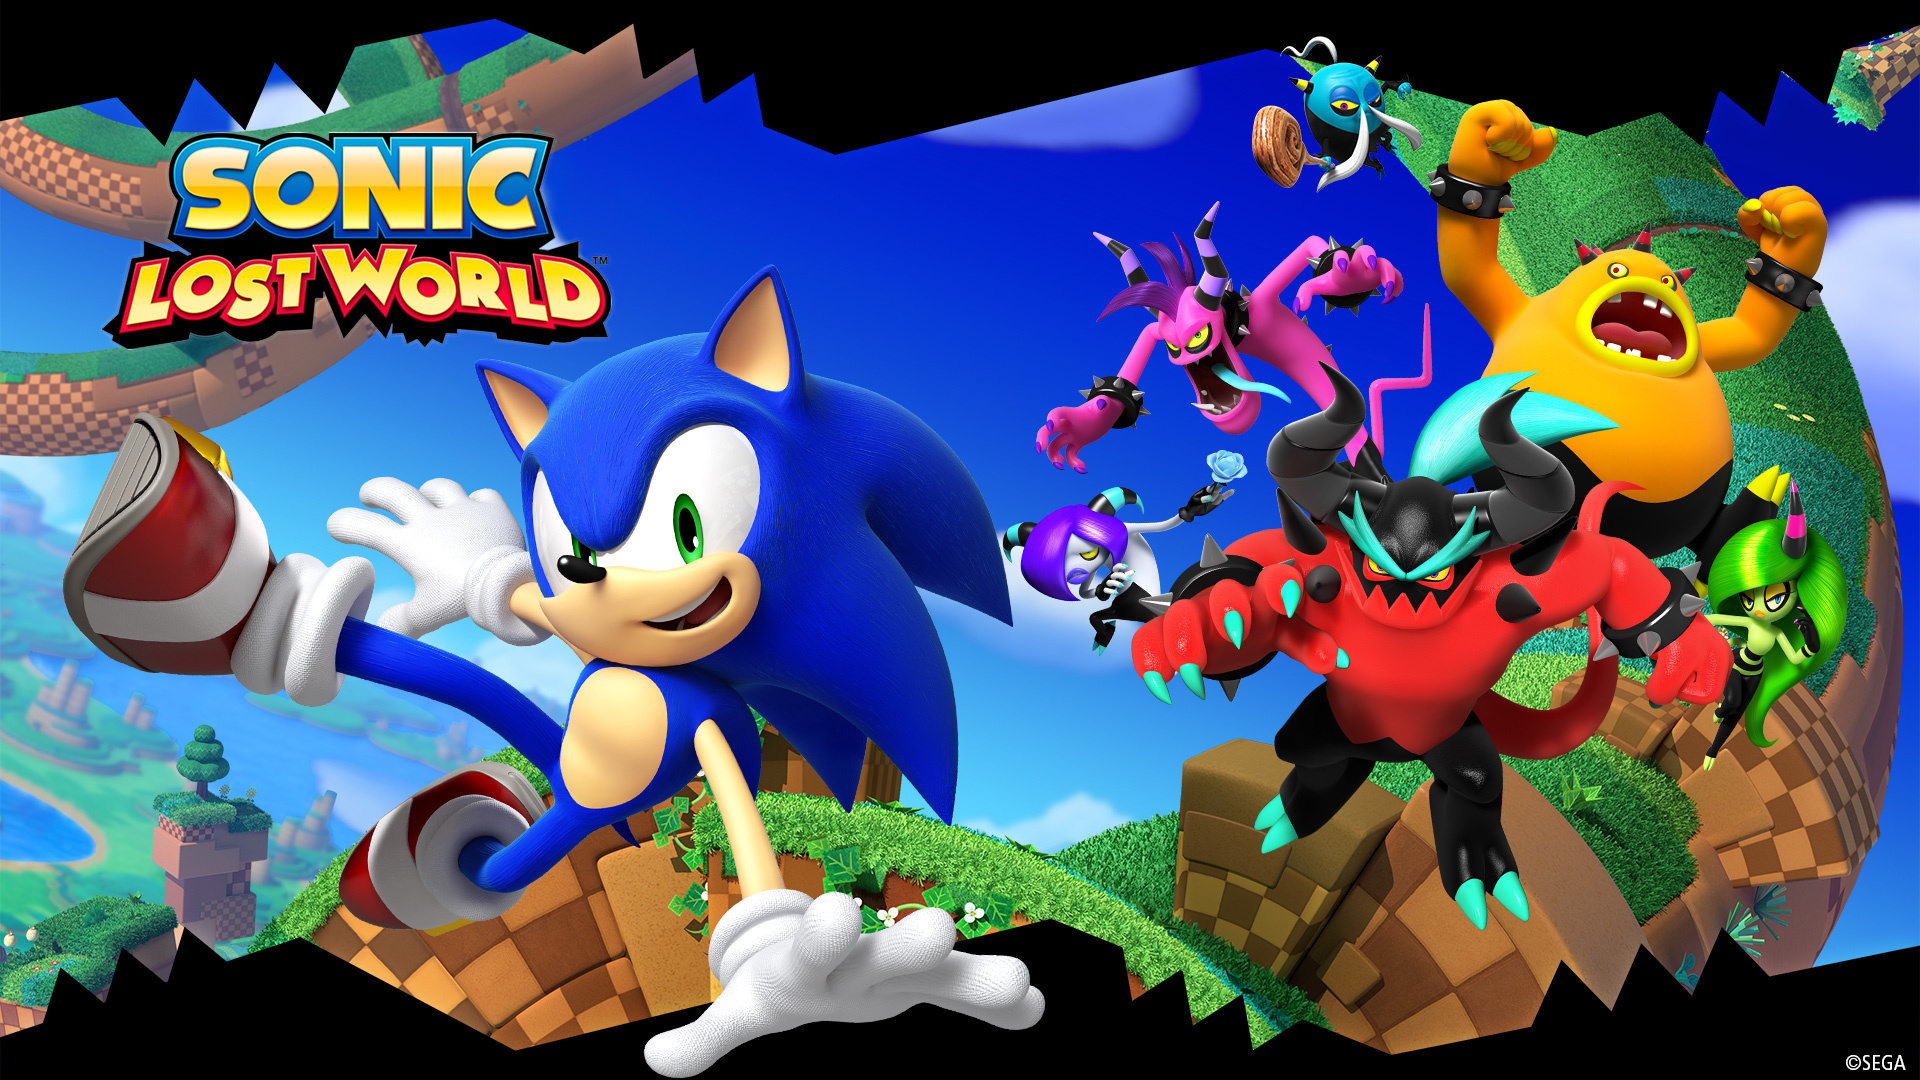 Sonic Lost World, Sonic the Hedgehog movie, Thrilling game adventure, Sonic wallpapers, 1920x1080 Full HD Desktop